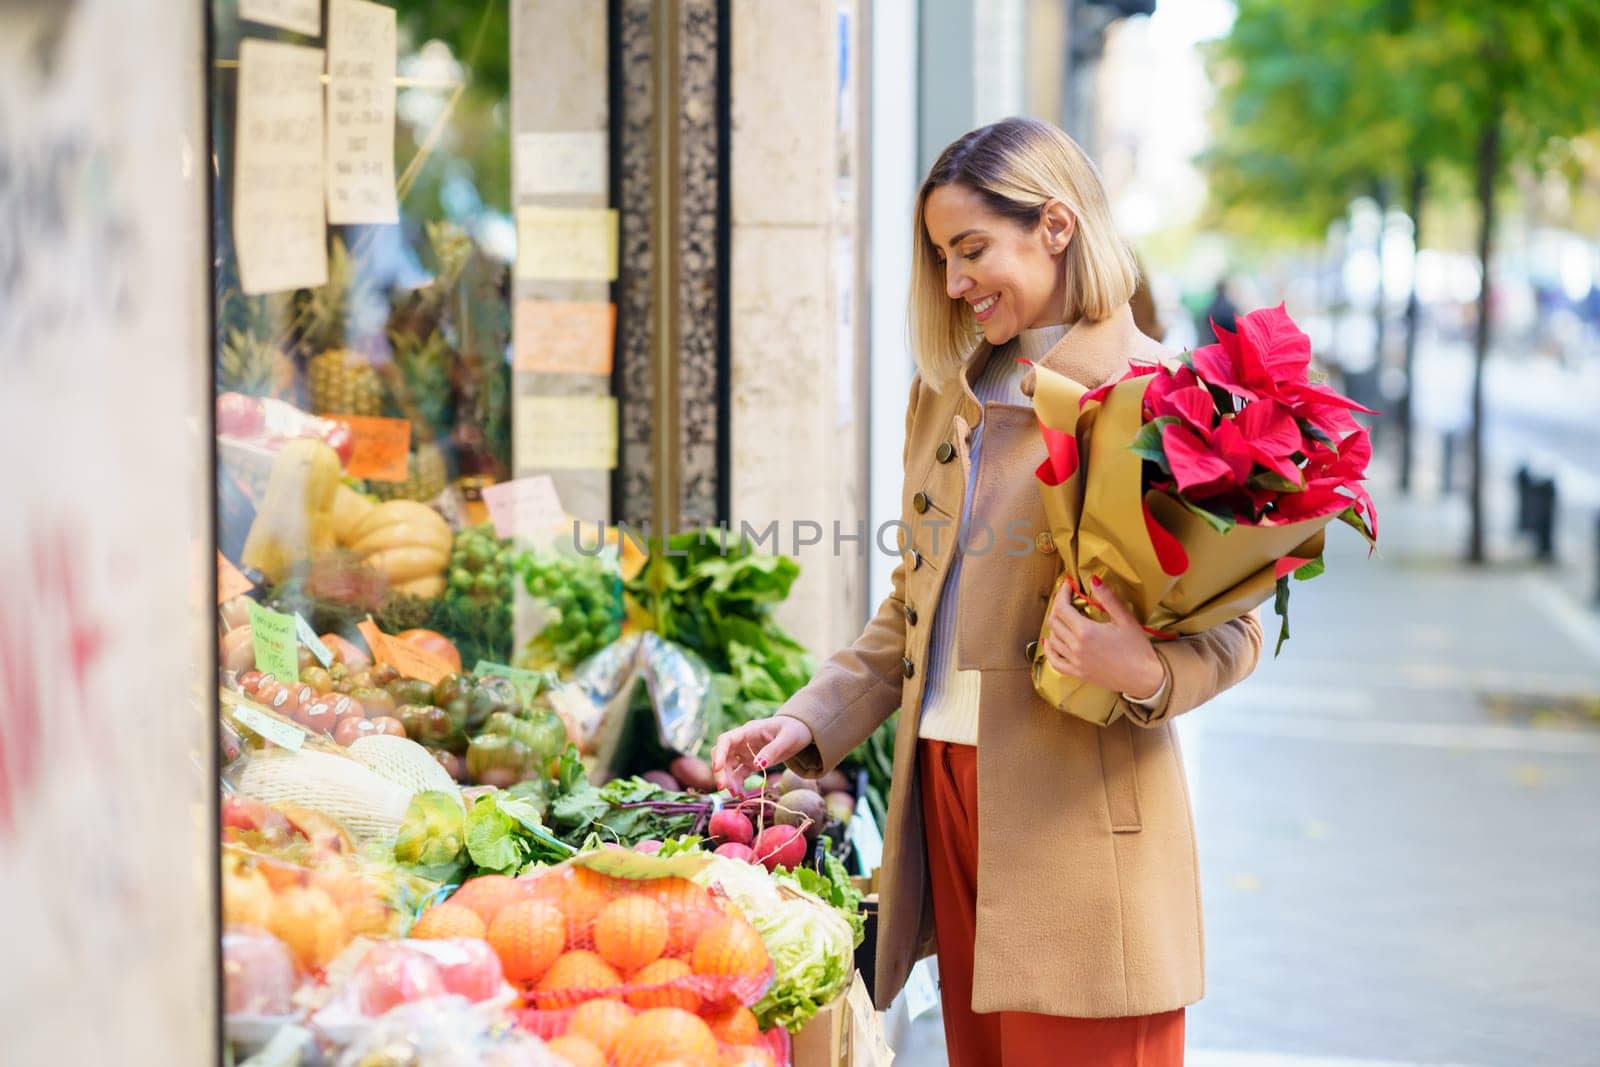 Cheerful woman with flowers picking vegetables outdoors by javiindy